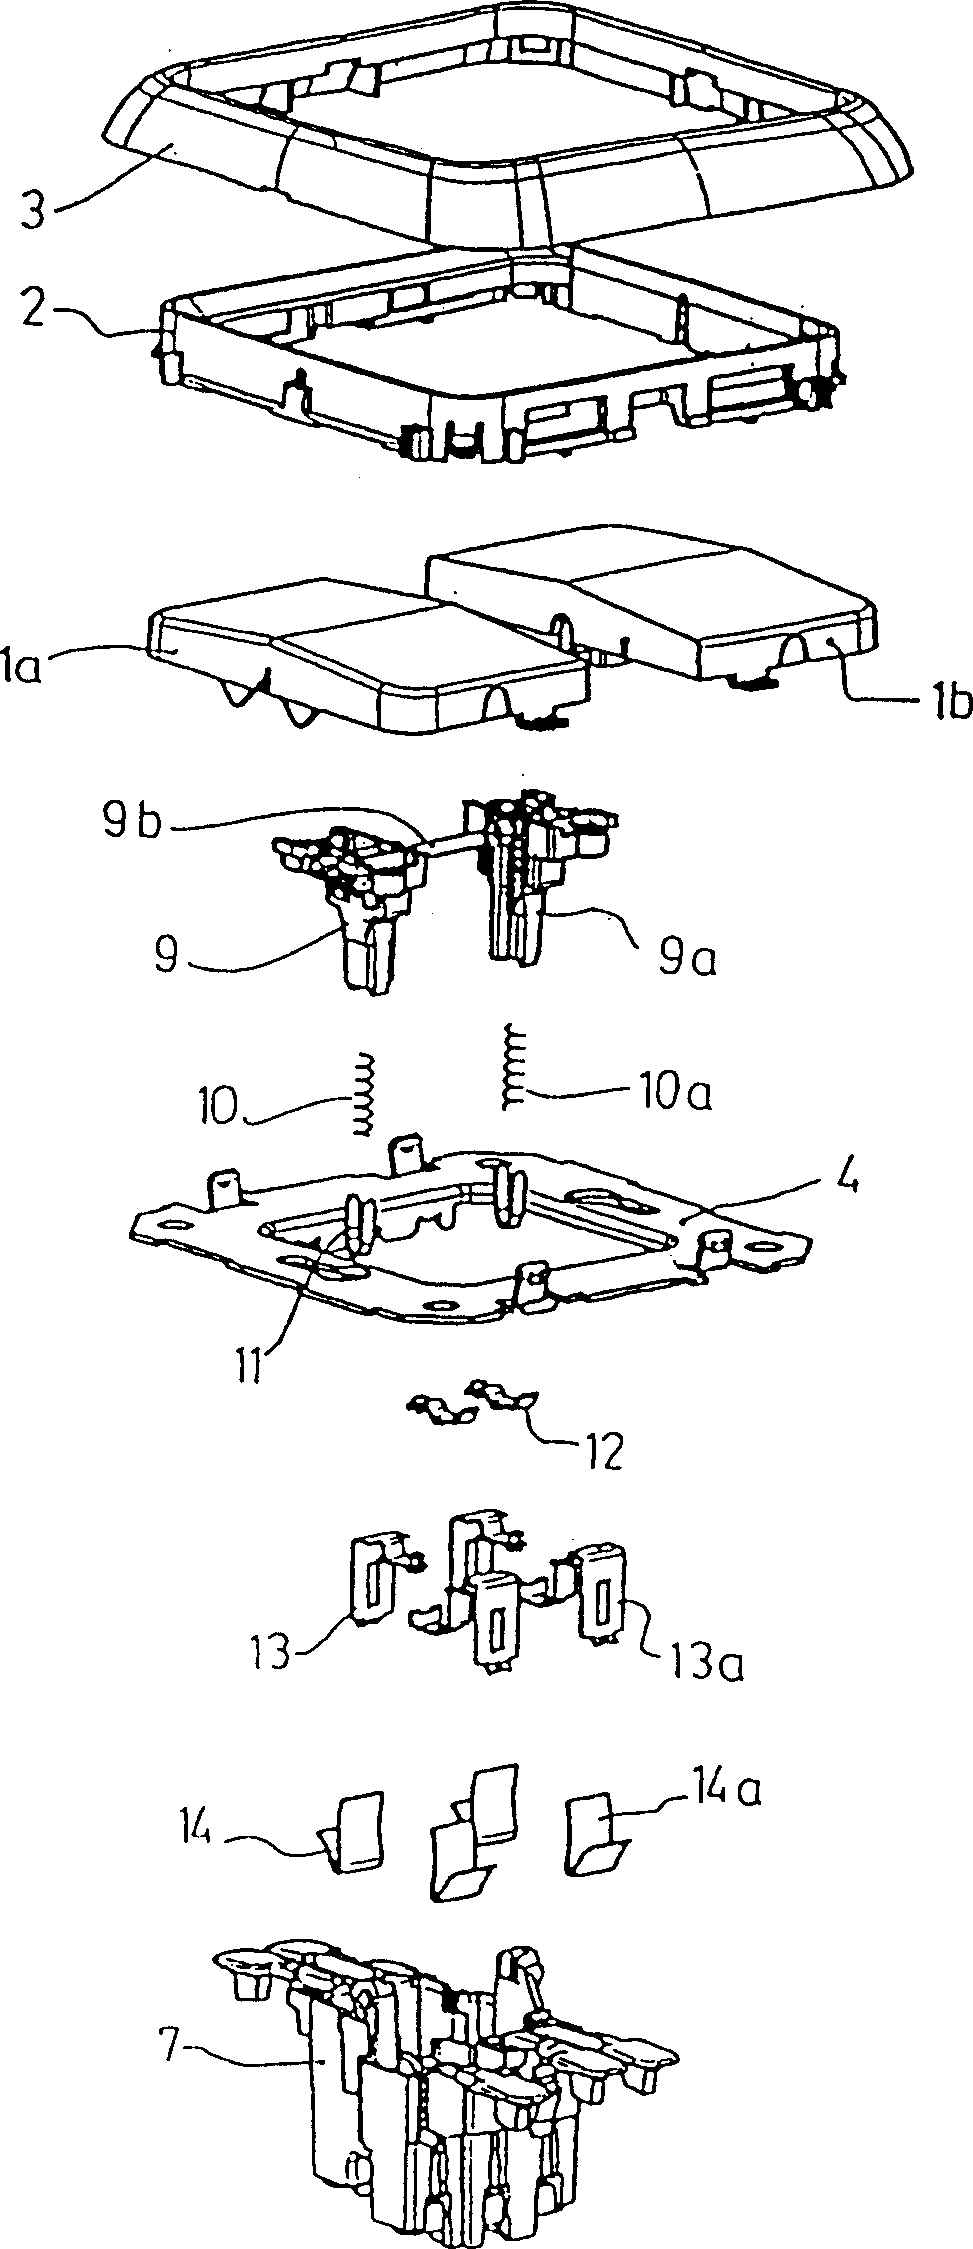 Improvement of electric mechanism internally fittd with toggle switch and for controlling low-voltage electric device